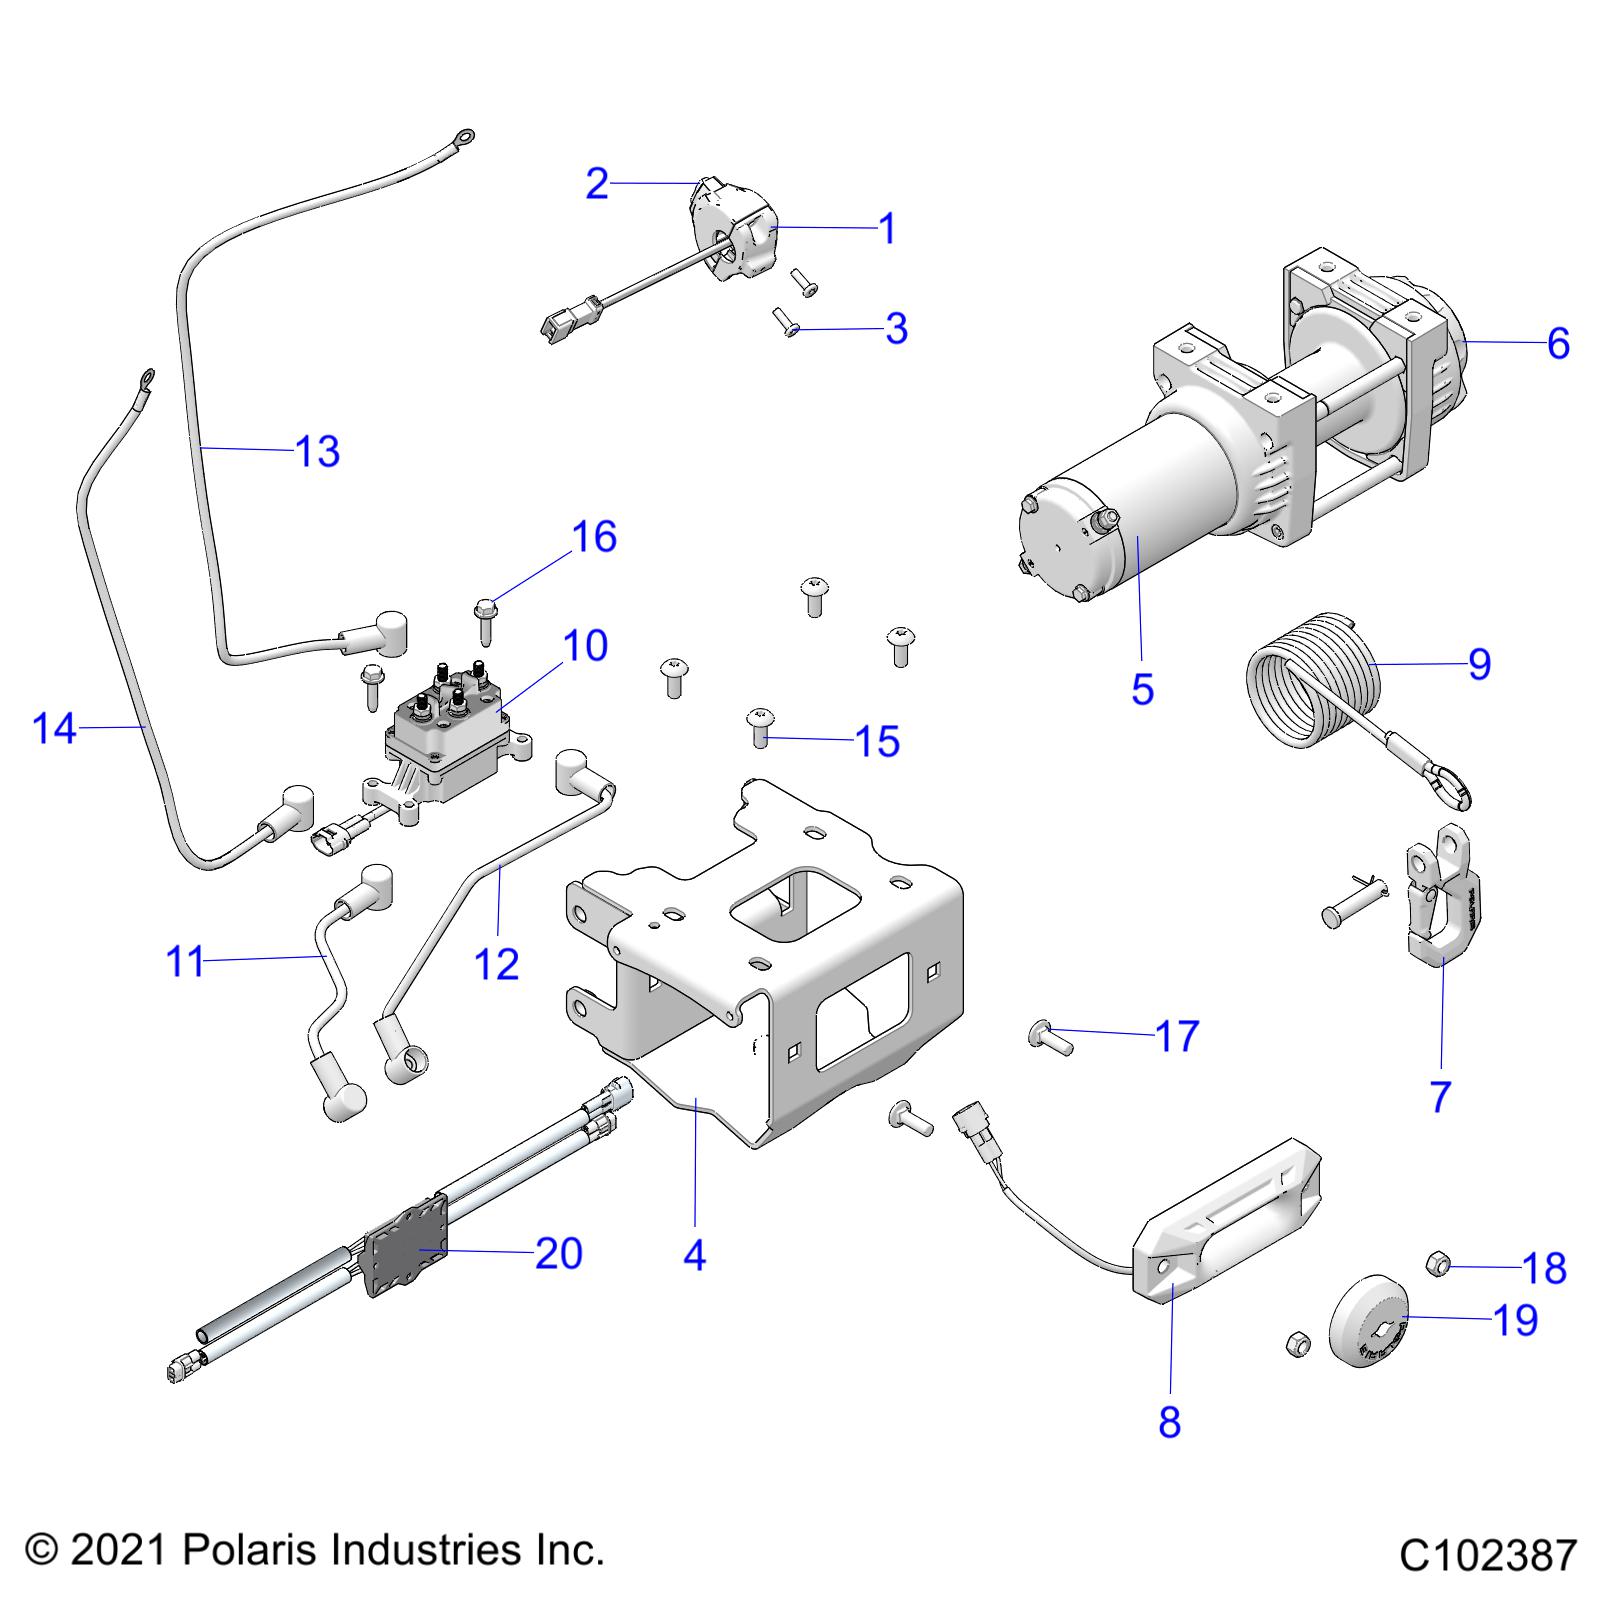 Part Number : 2638514 ASM-WINCH 35SYN RC SXP